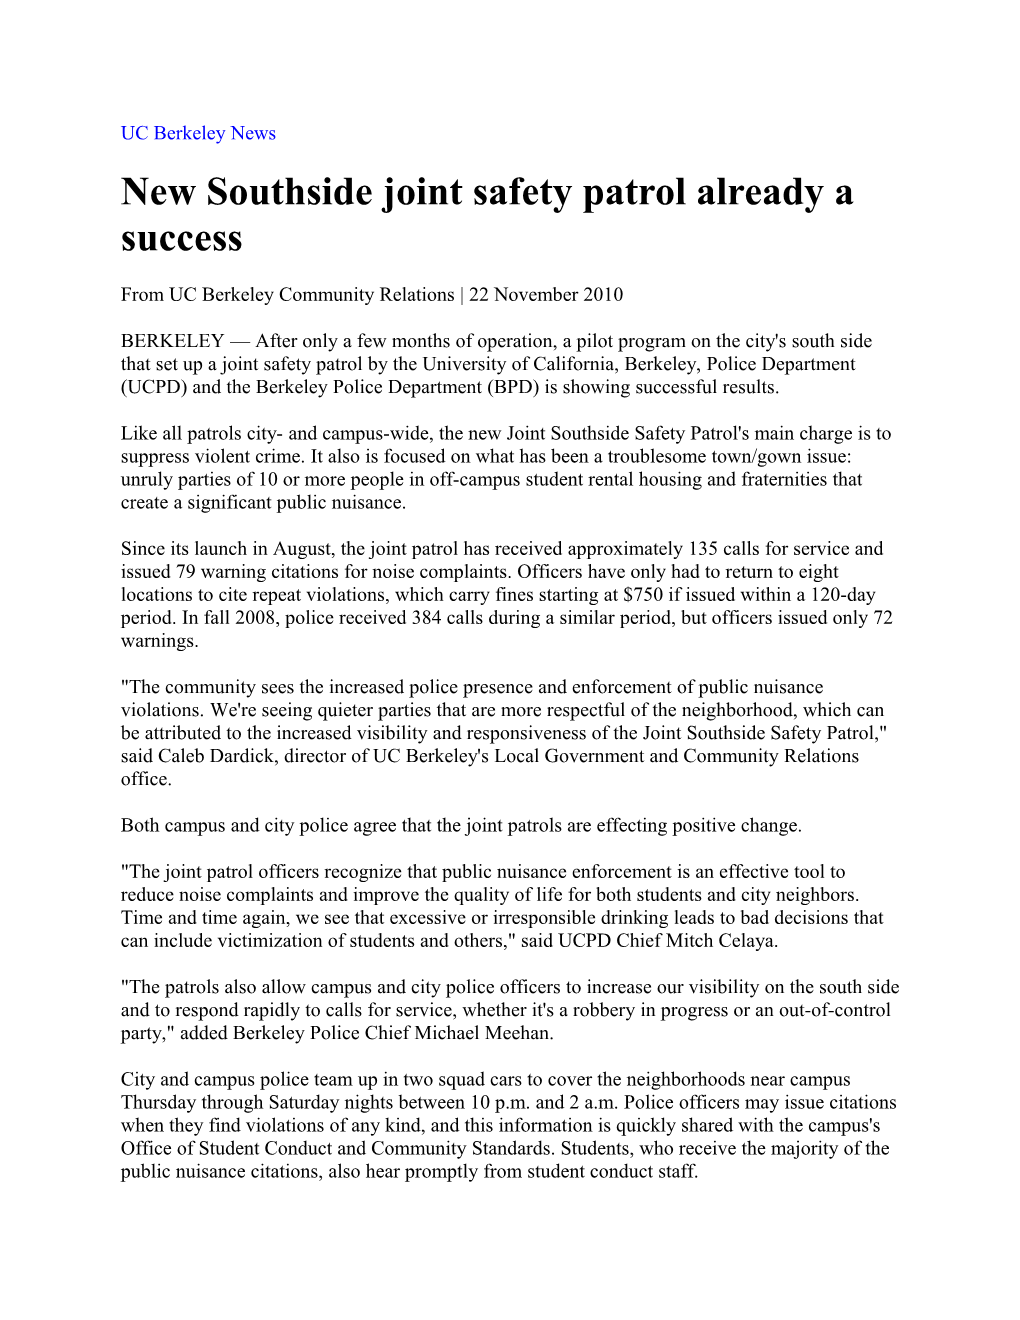 New Southside Joint Safety Patrol Already a Success